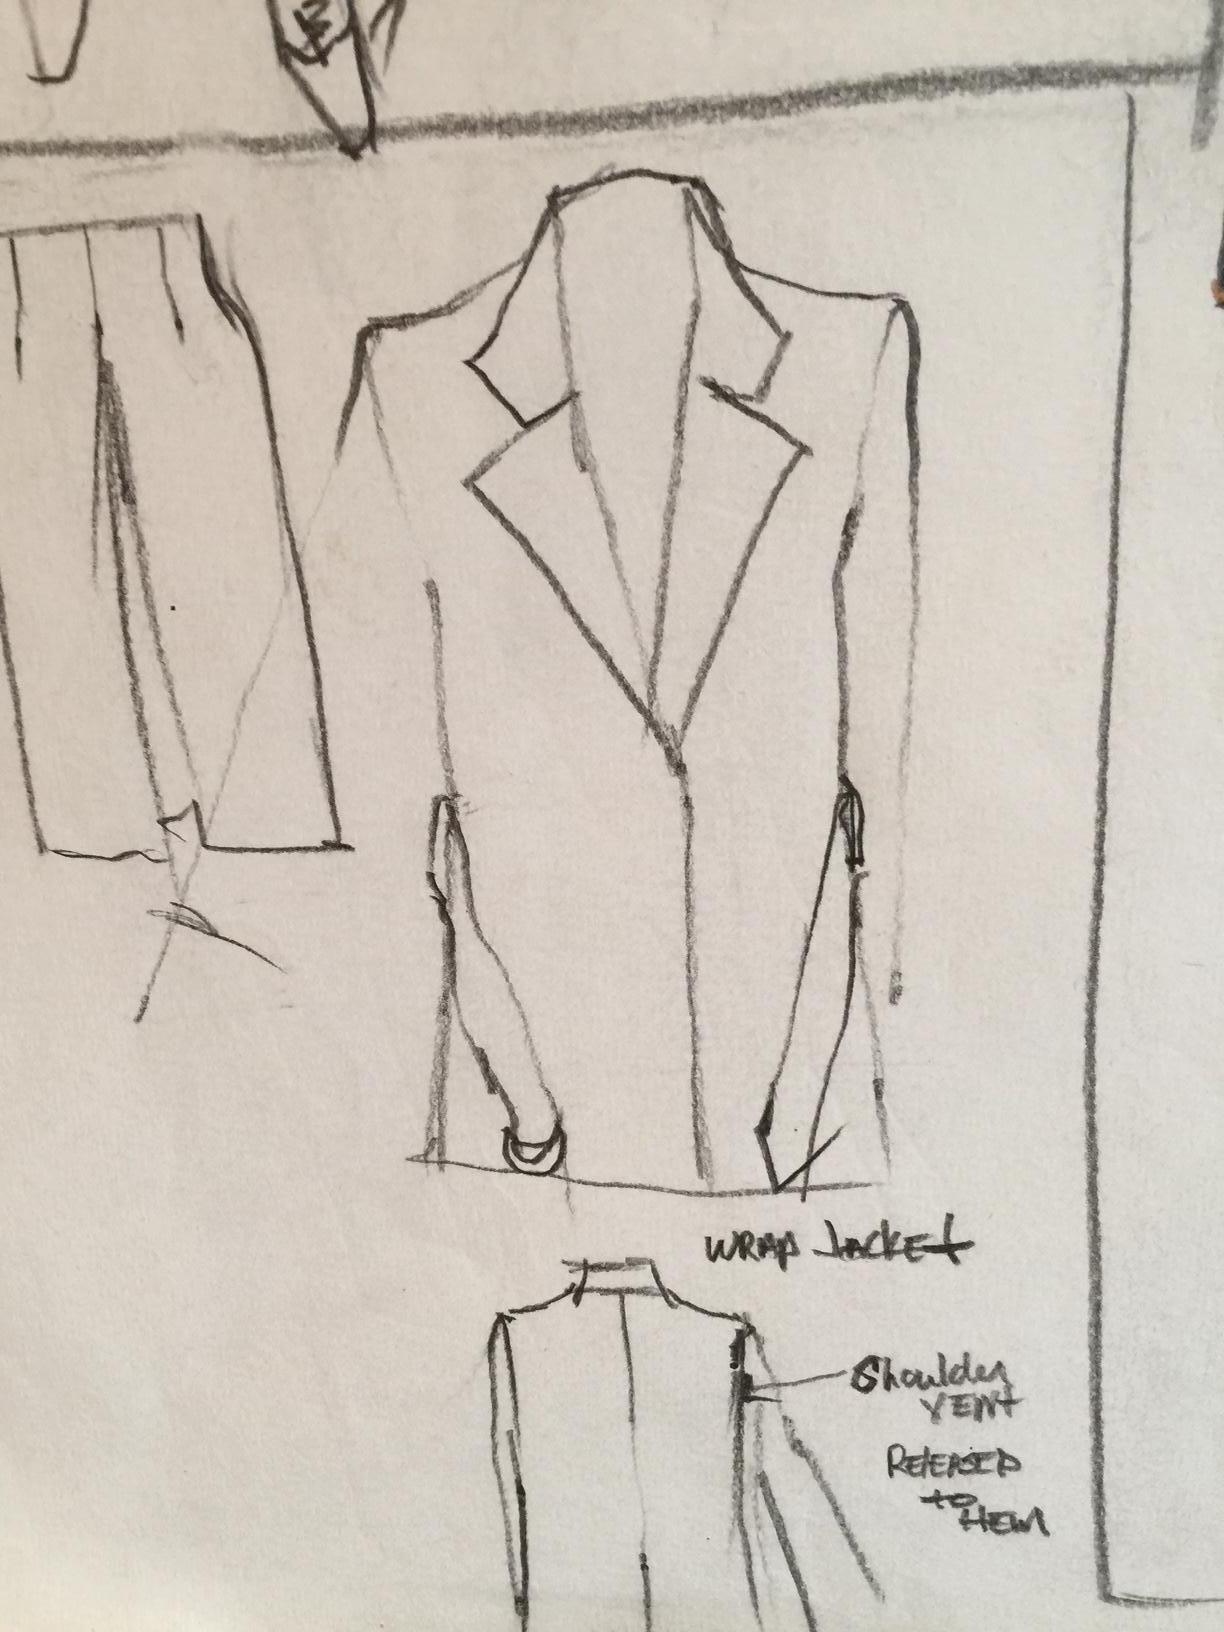 Rare Original Fashion Sketch With Production Notes - Art by Gordon Henderson